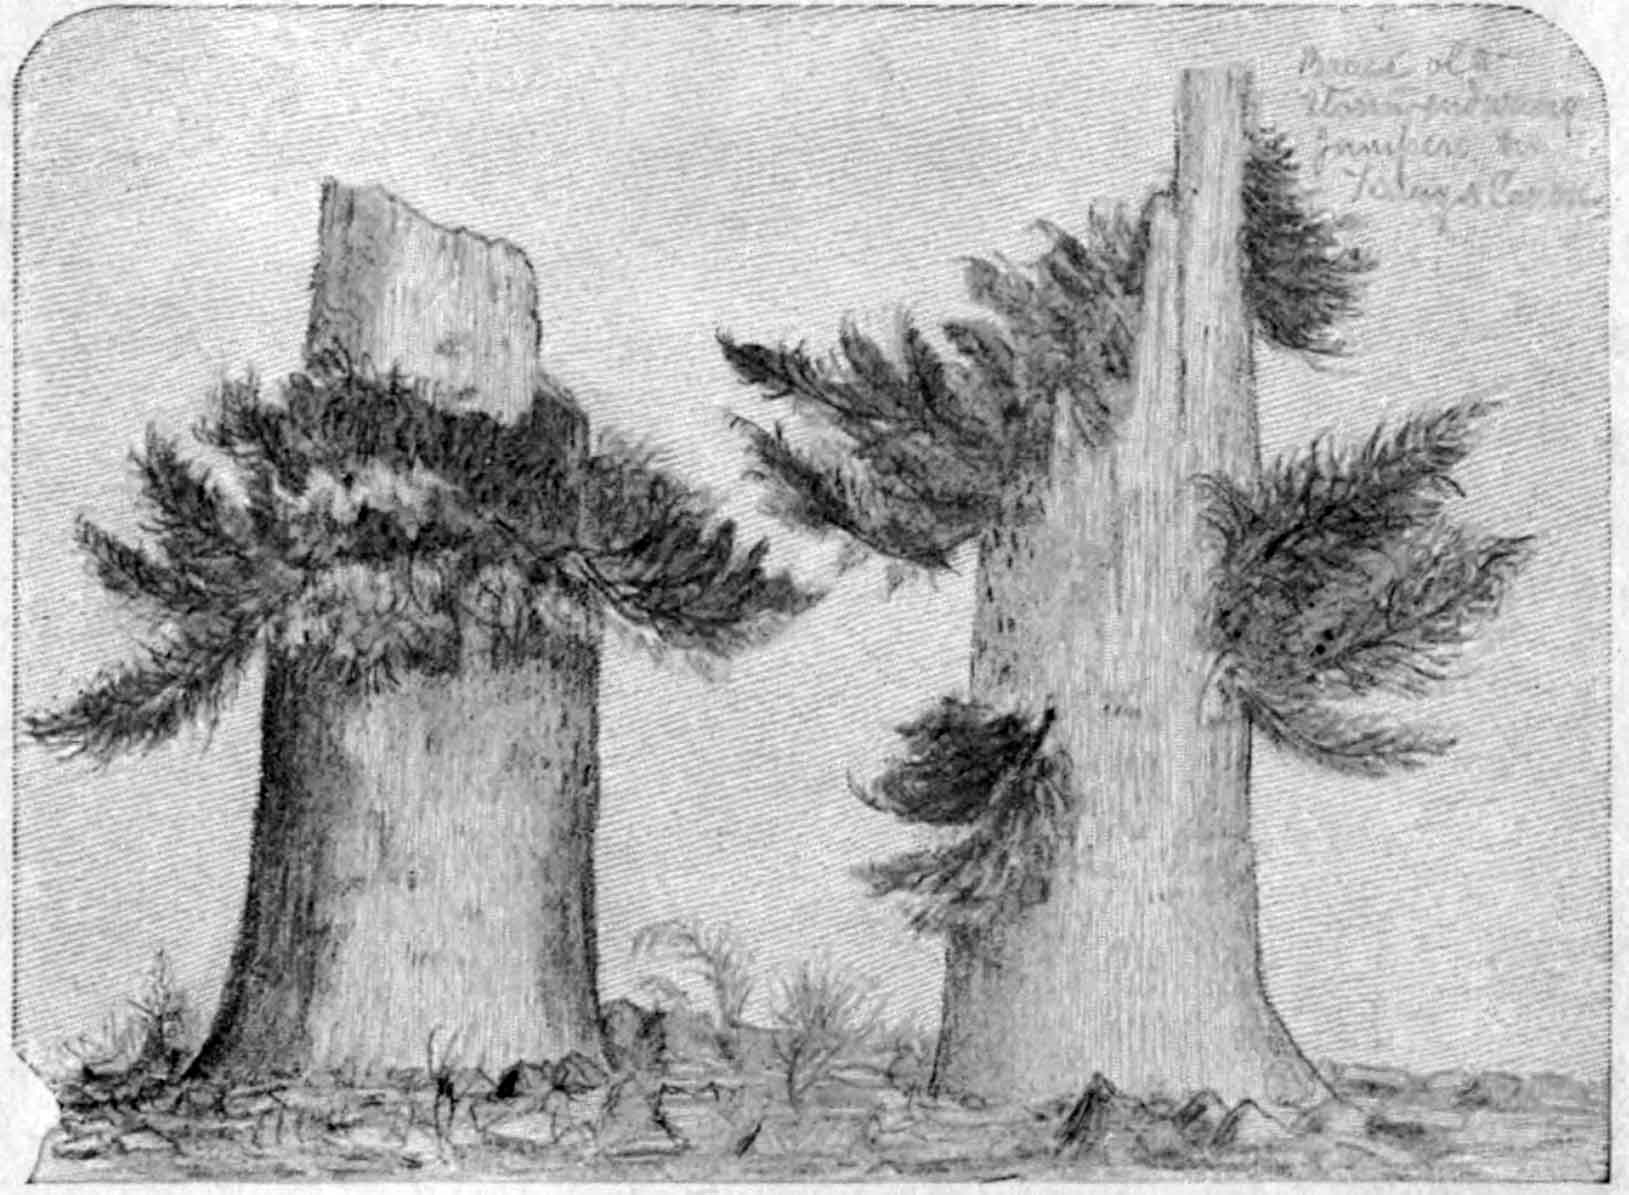 A sketch of two juniper stumps with small branches growing from their trunks. The stumps appear to be old and broken but the branches that grow from them look healthy and lush.